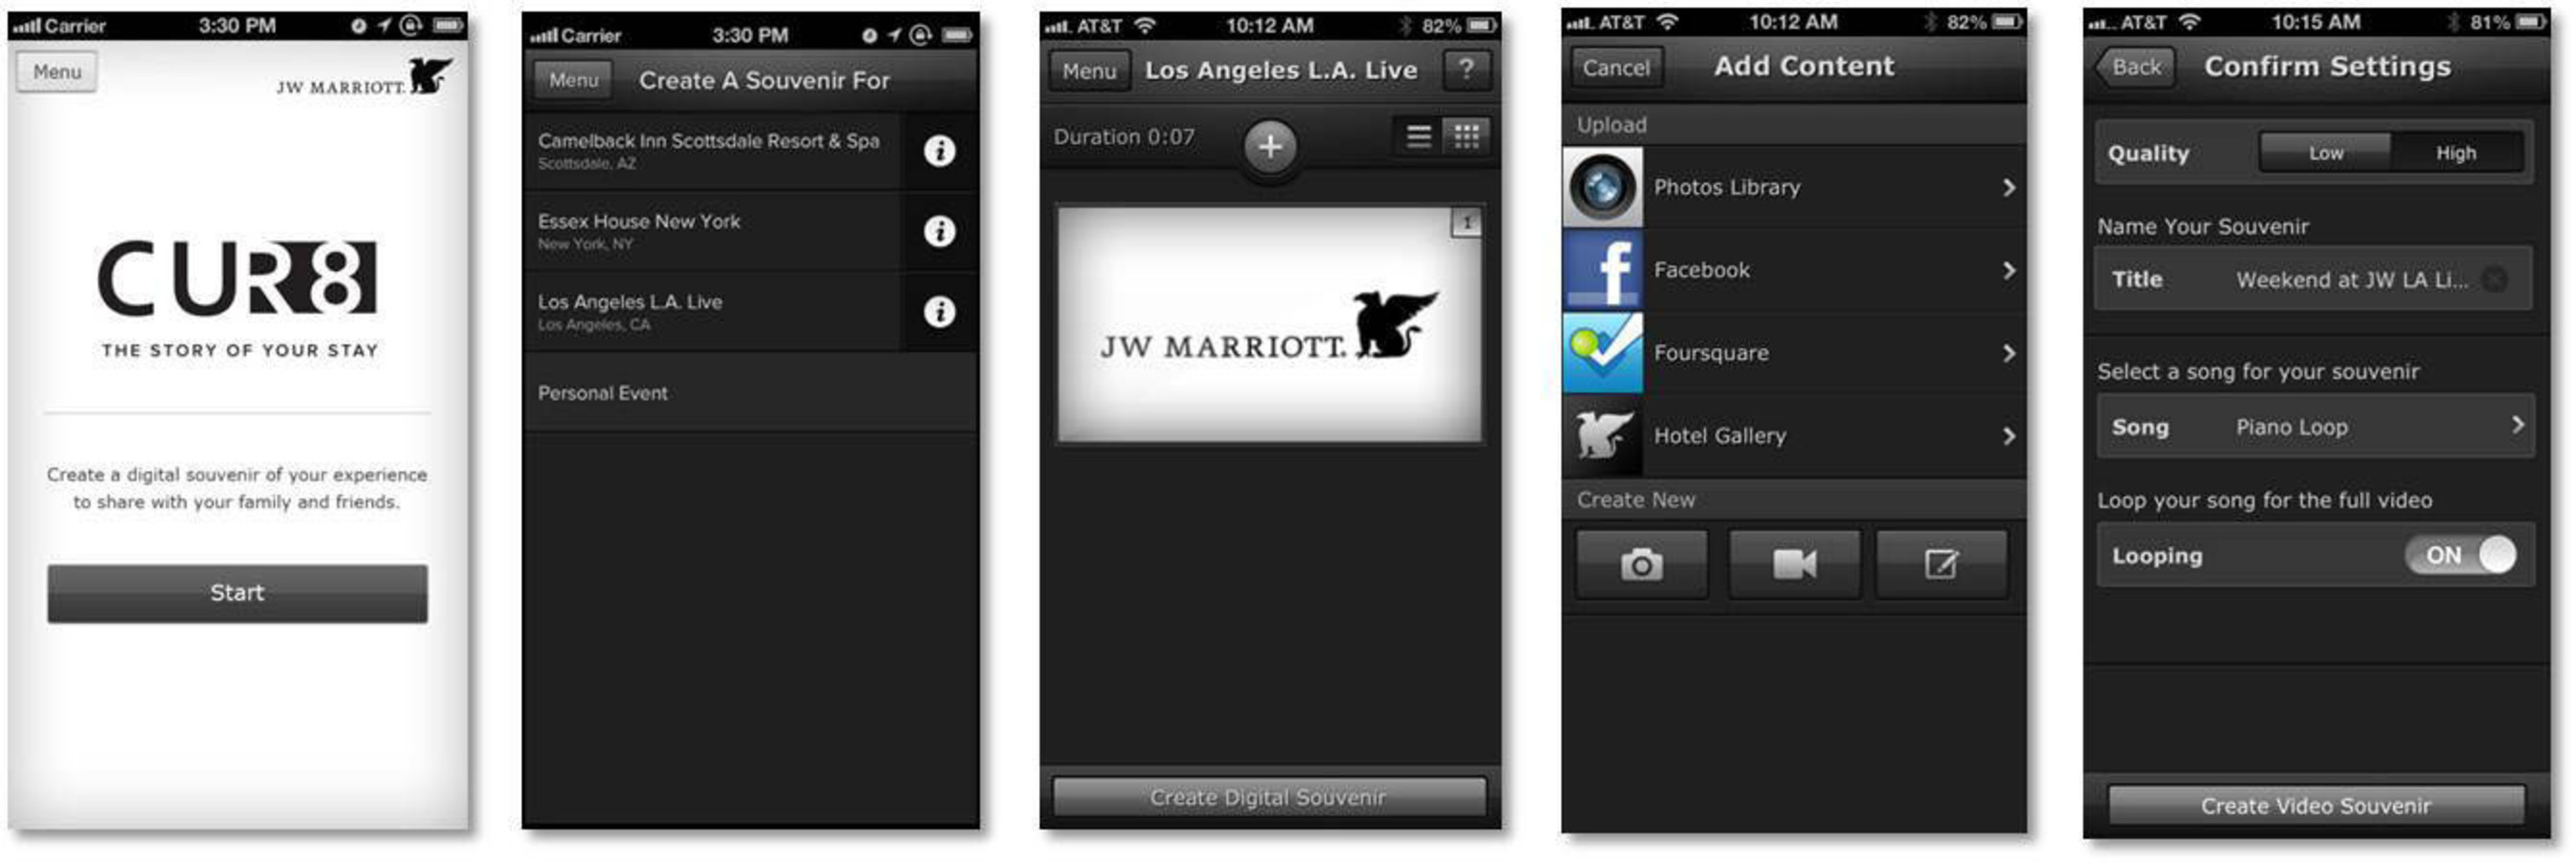 JW Marriott Hotels & Resorts Launches CUR8 App for Travelers. (PRNewsFoto/JW Marriott Hotels & Resorts)